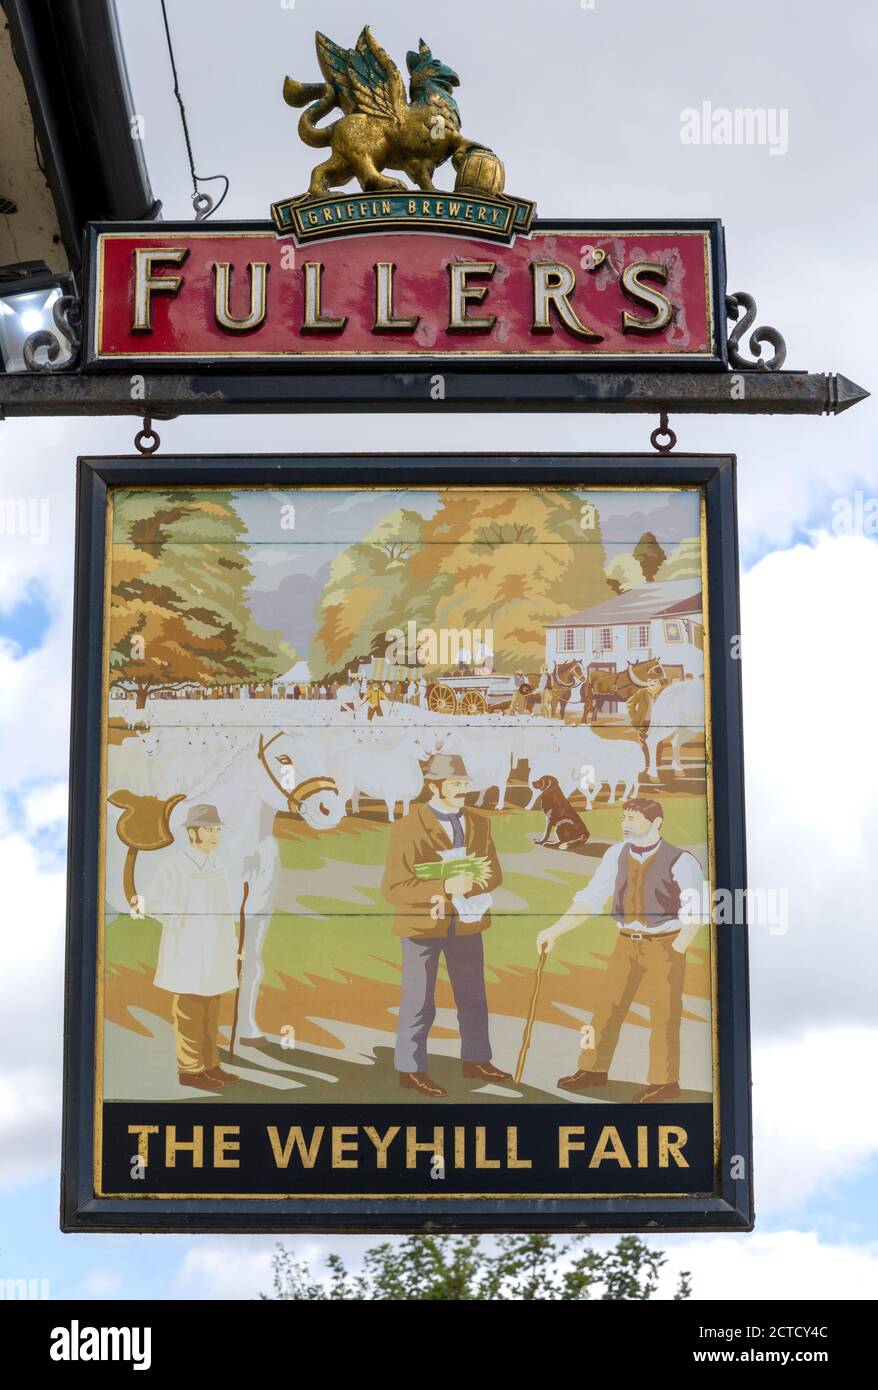 Traditional hanging pub sign at  The Weyhill Fair public house a Fuller's Pub at Weyhill, Andover, Hampshire, England, UK Stock Photo